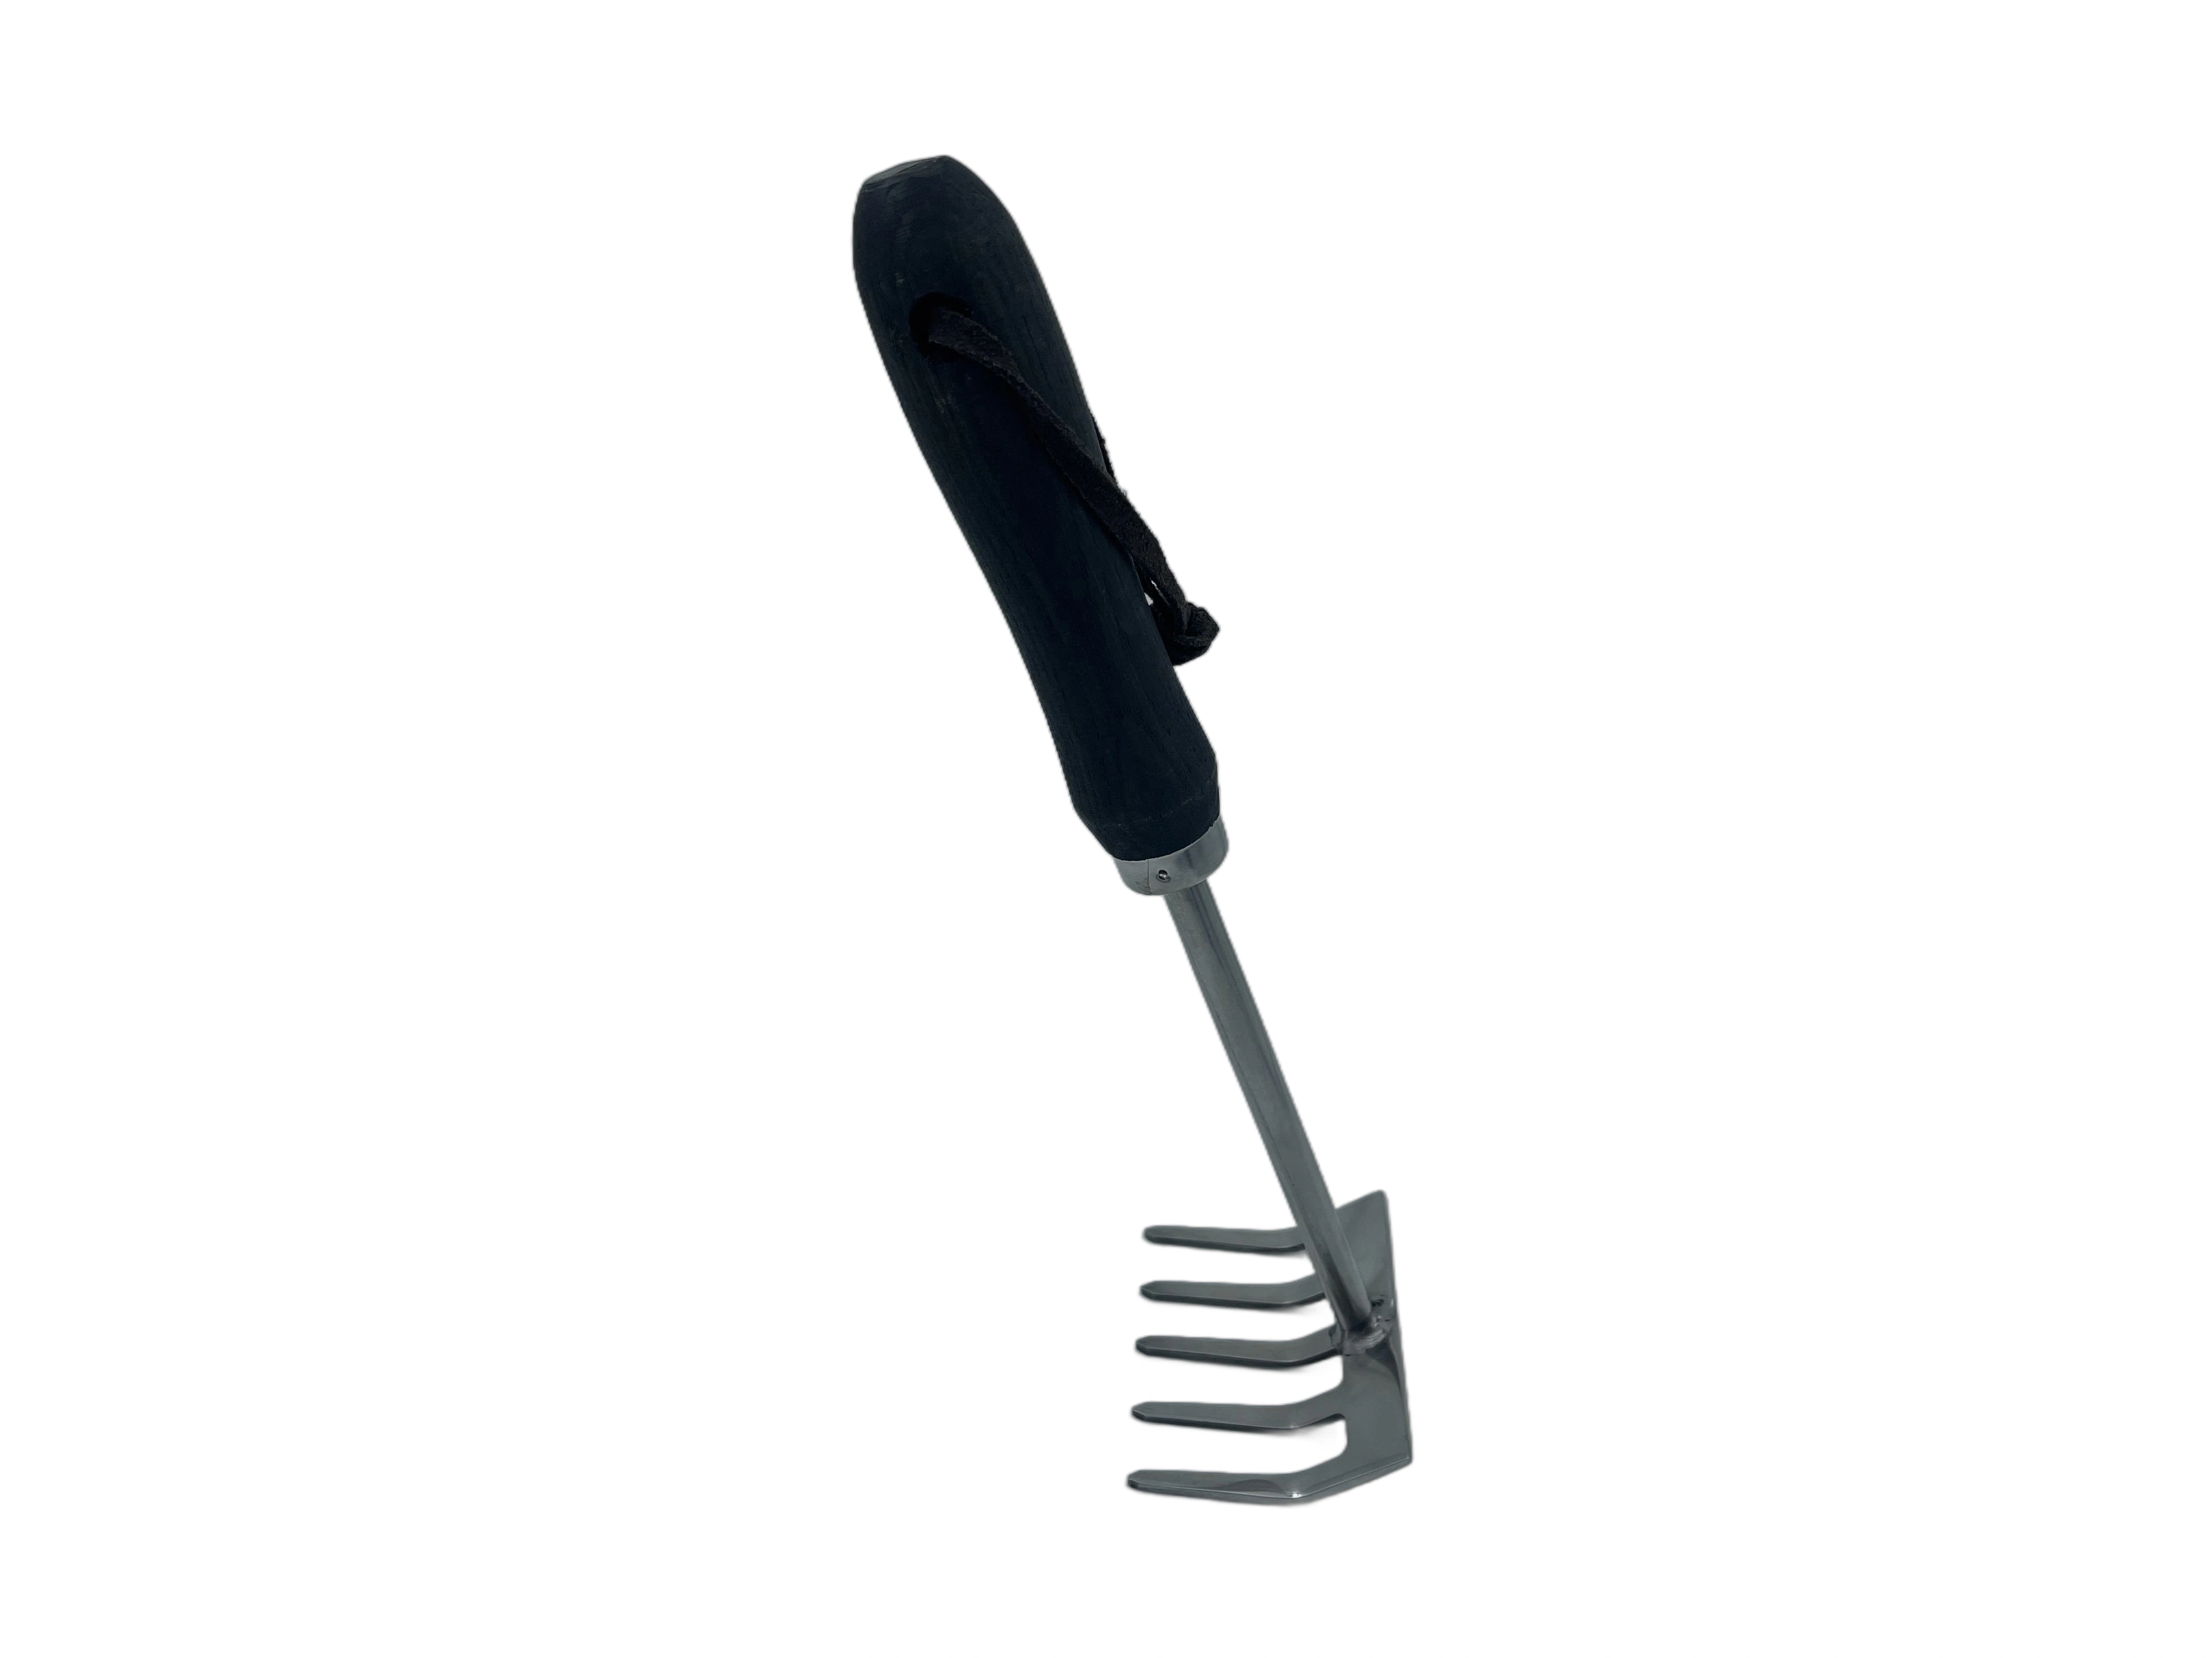 Stainless steel 5T Rake with Ash wood handle-3